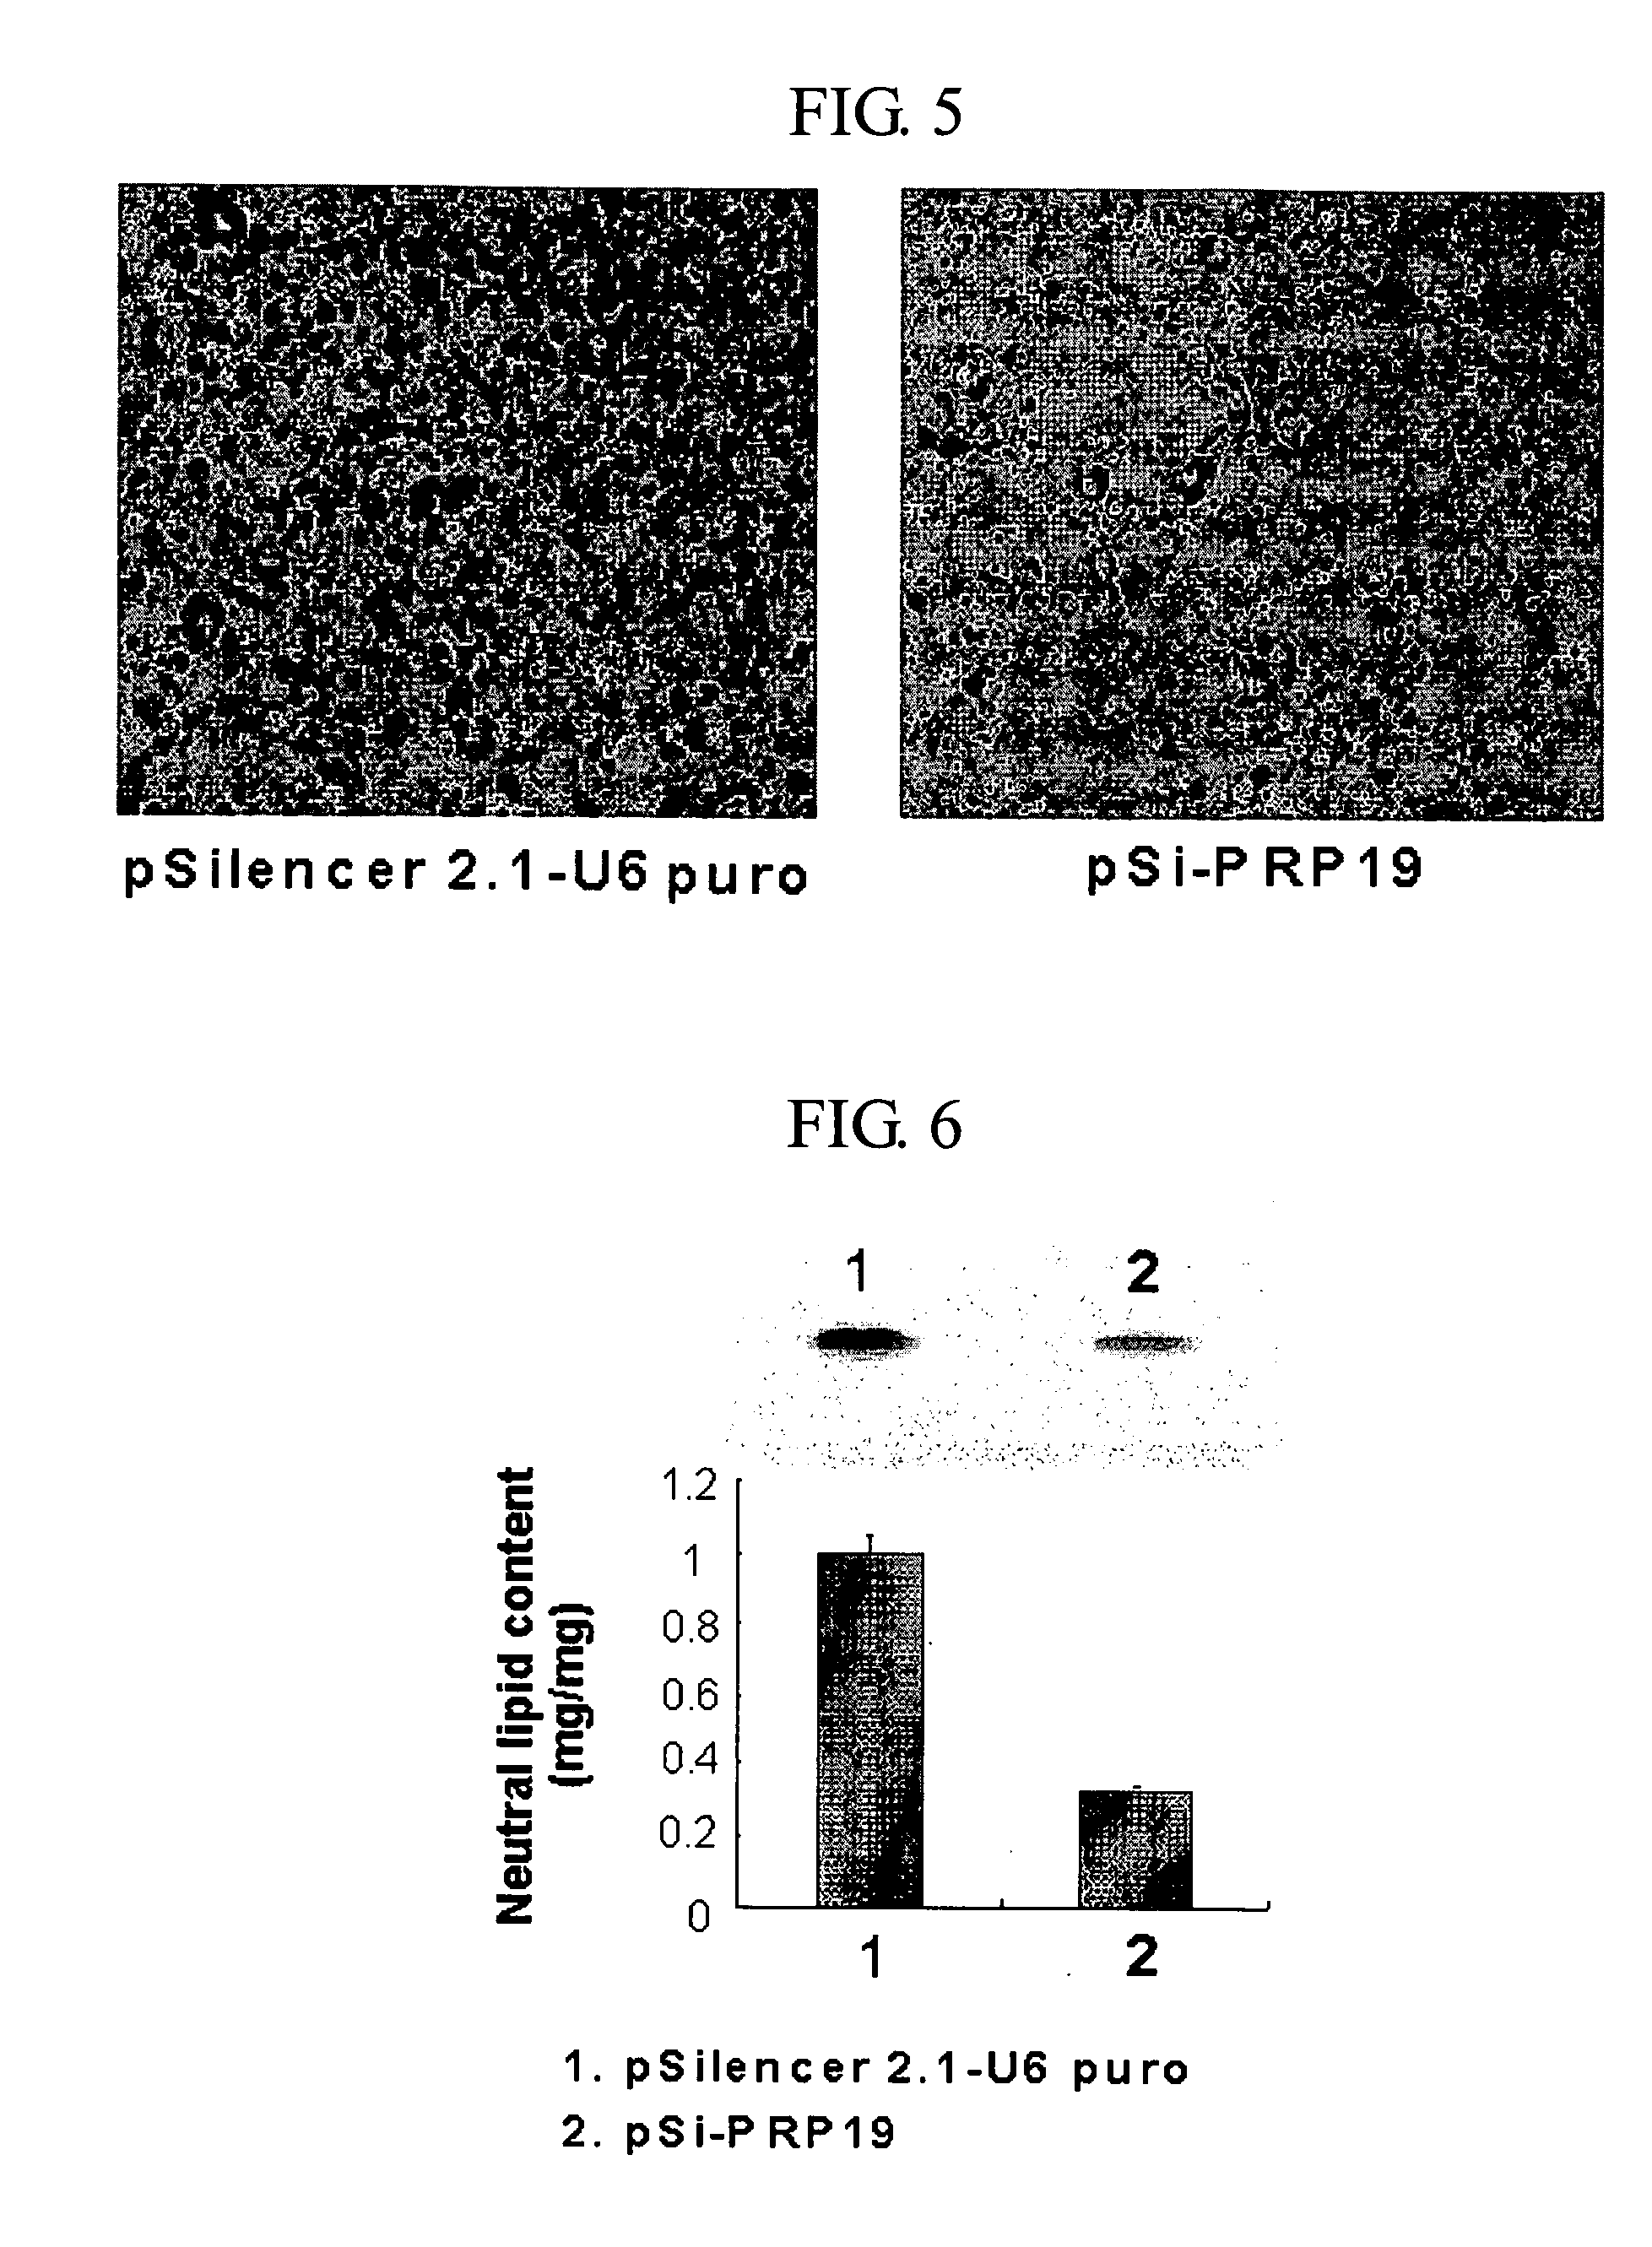 Method for inhibition of lipogenesis by regulating PRP19 expression